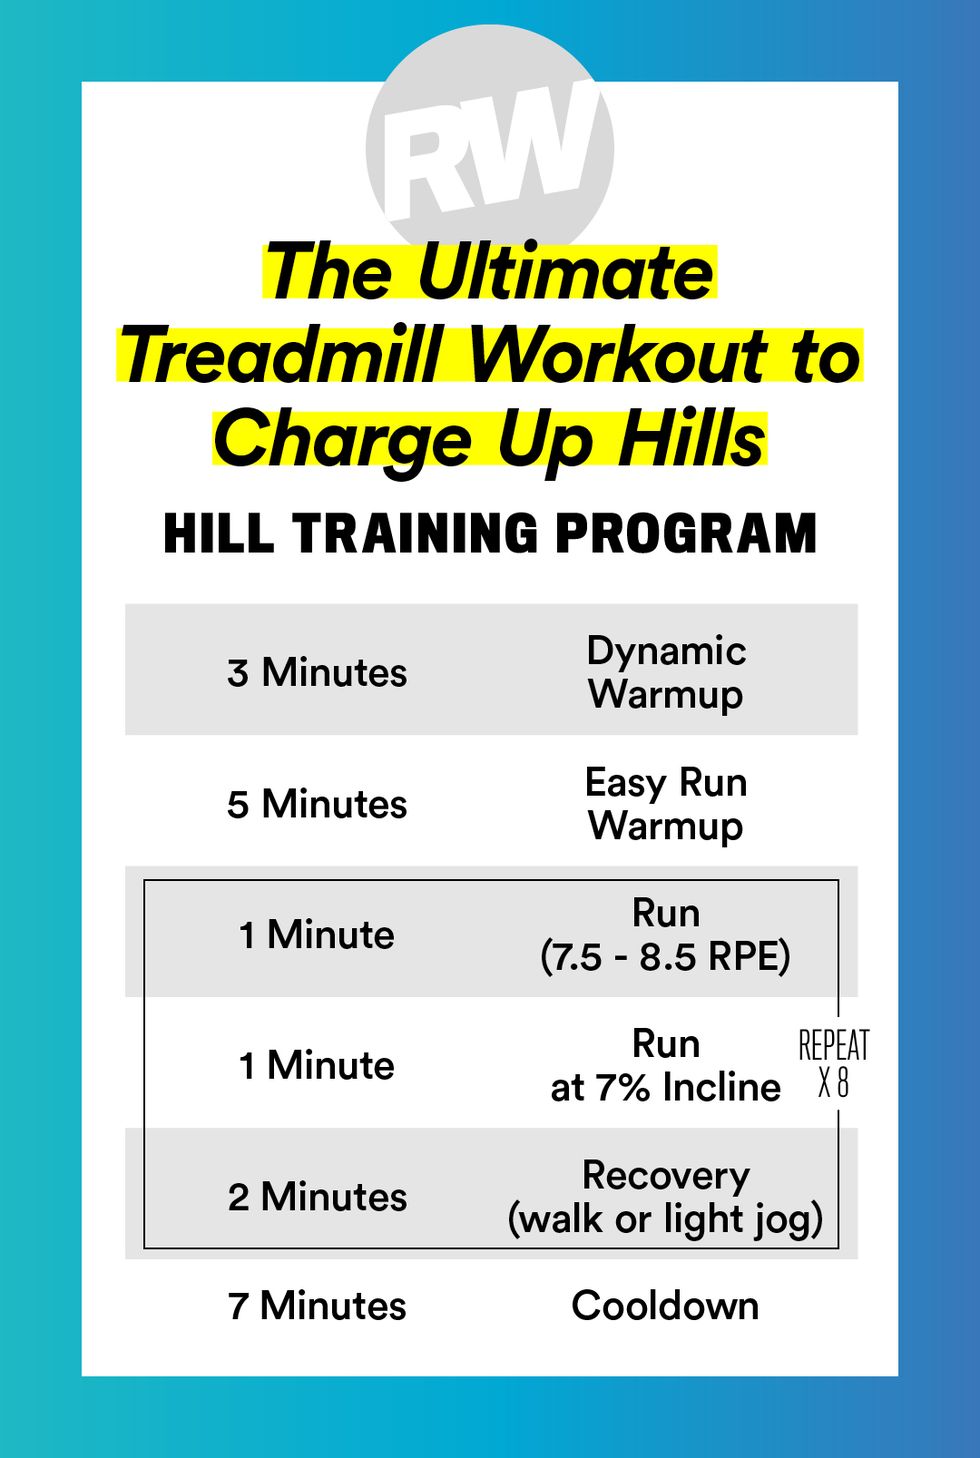 Hill Sprint Workout Routine - 3 Expert Tips (Benefits + Workouts)